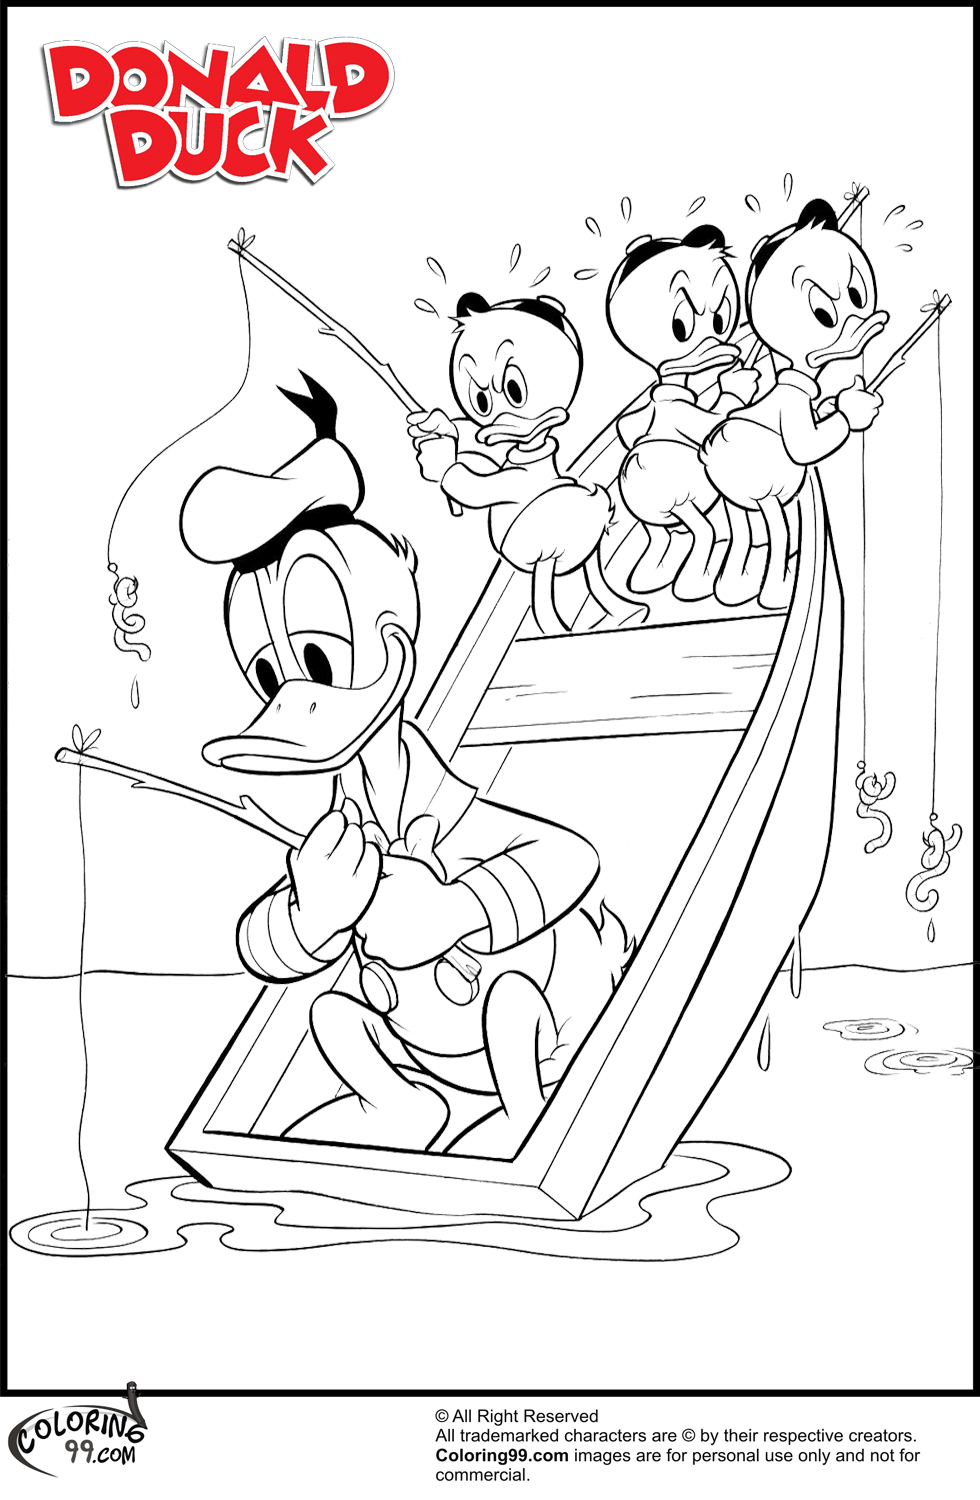 Download Donald Duck and His Nephiews Coloring Pages | Team colors